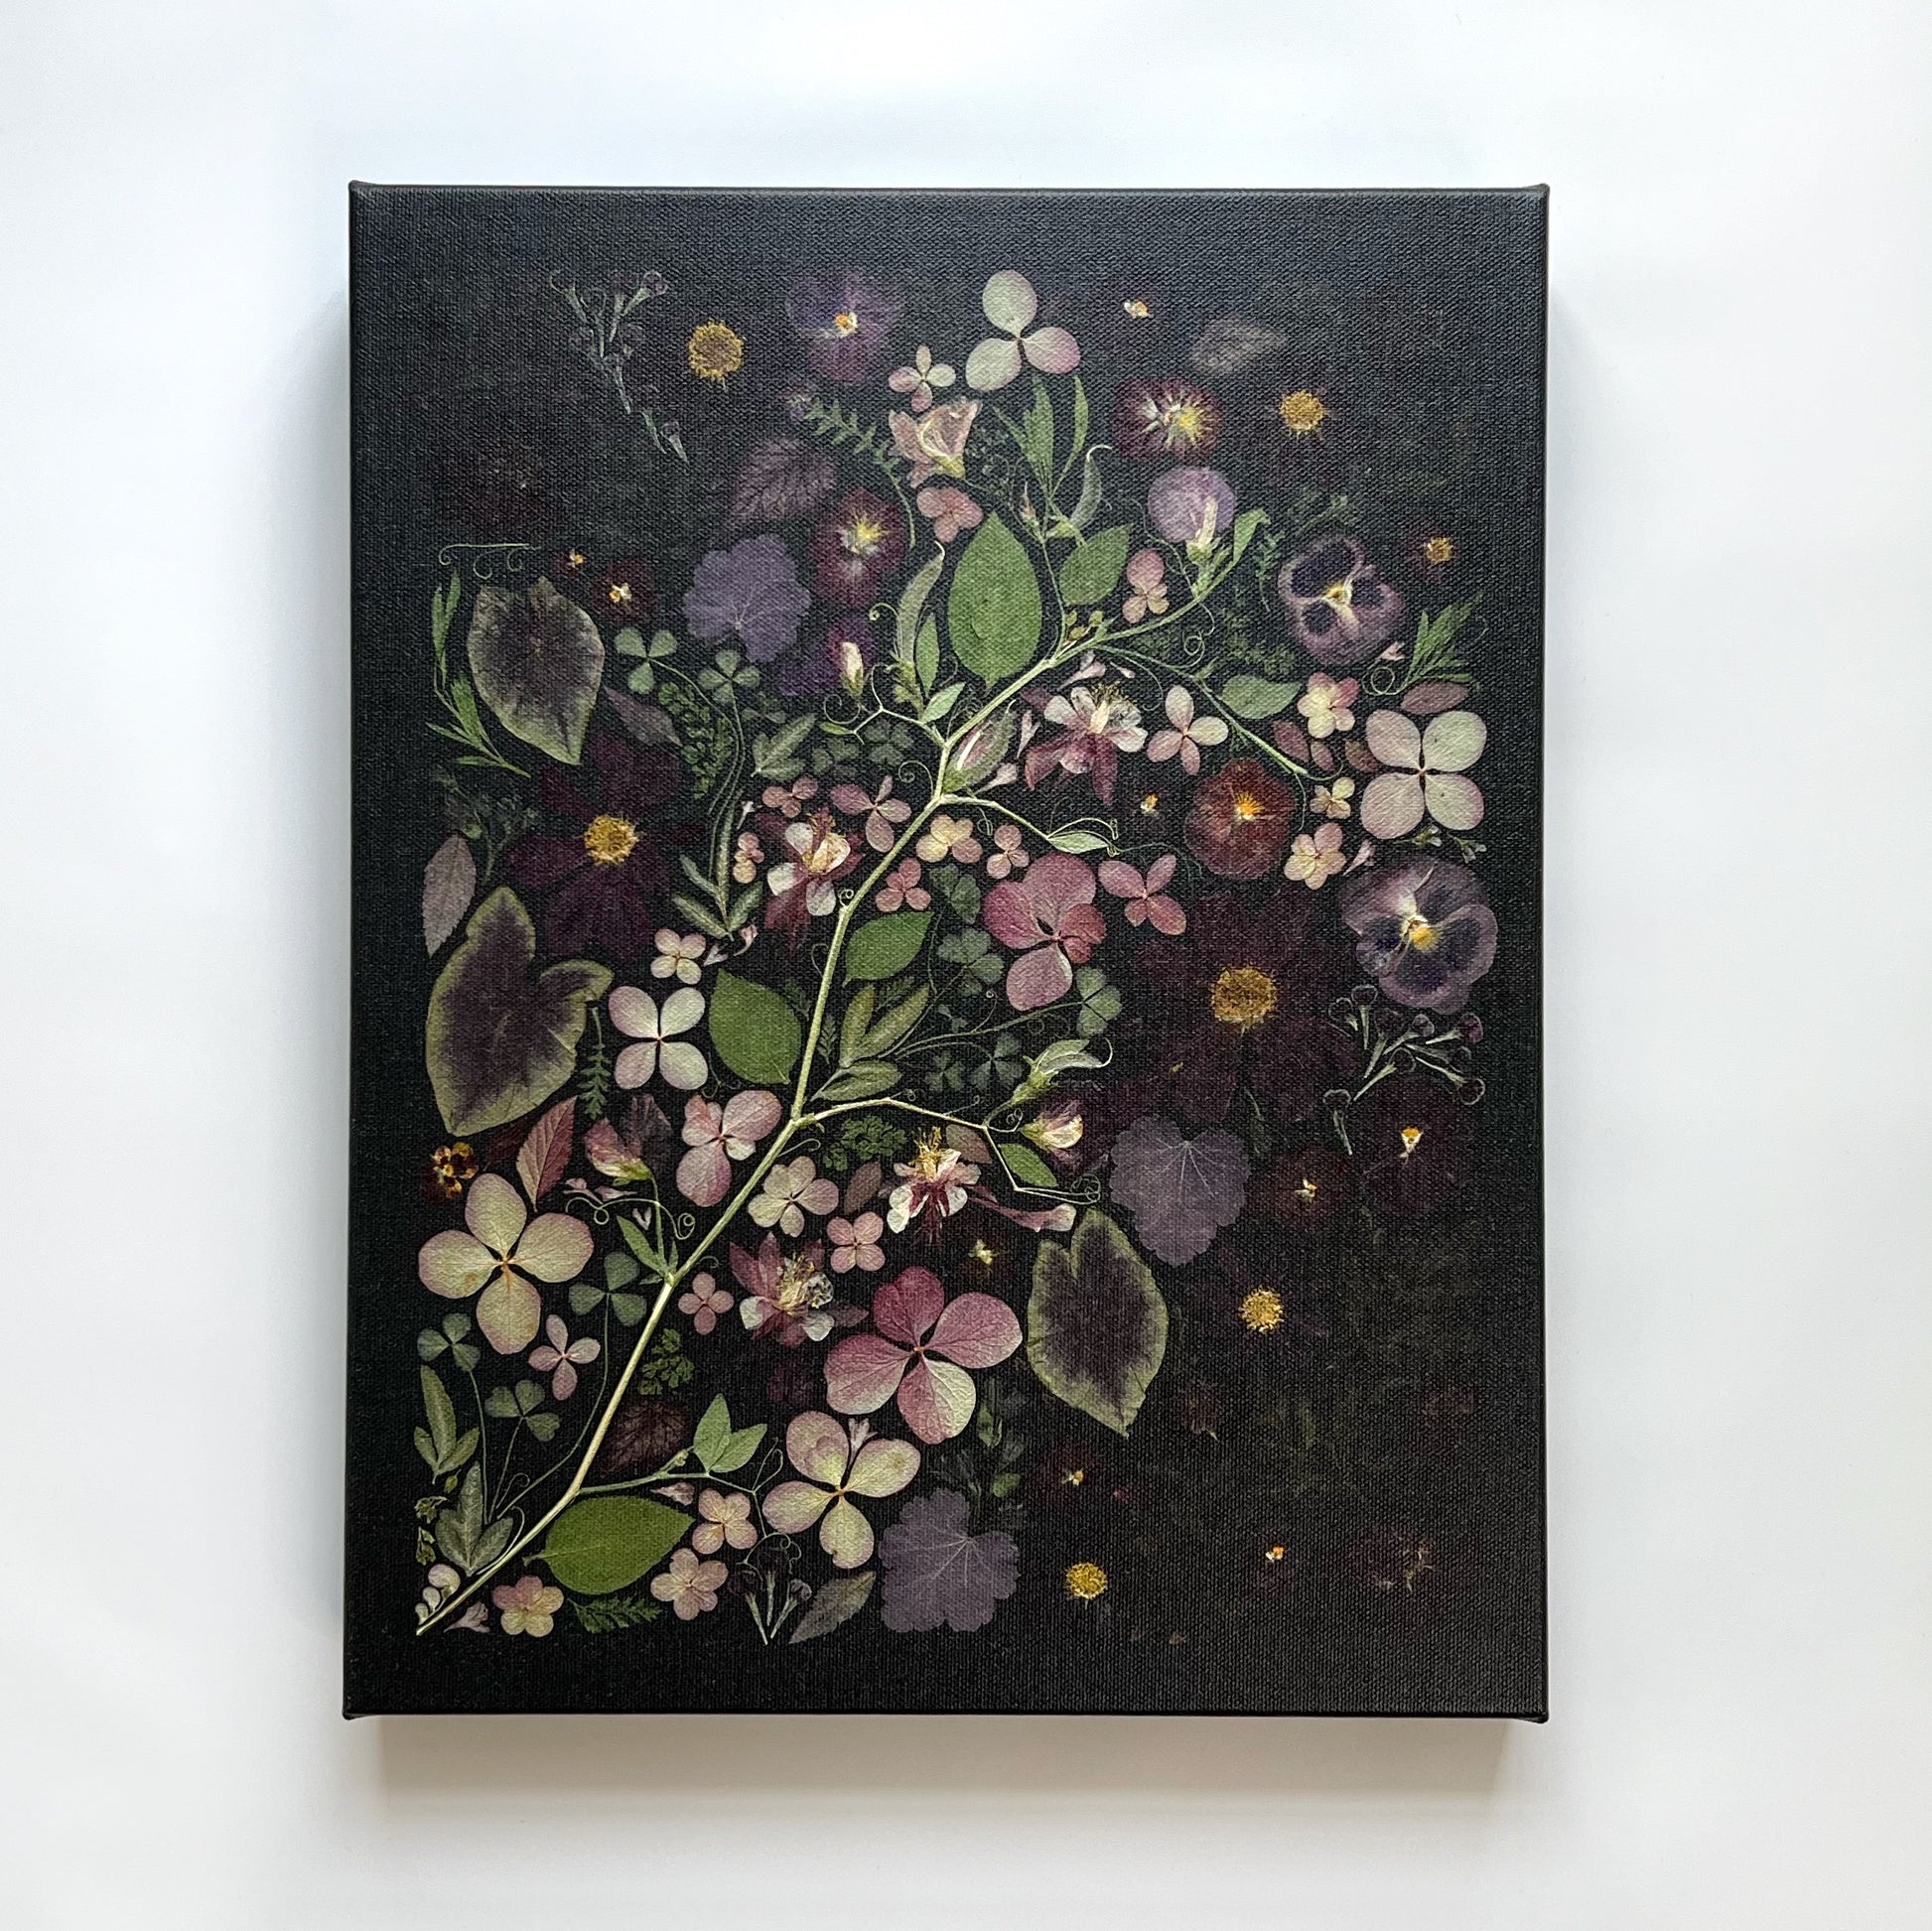 A black satin finish canvas on a white background. The canvas is a display of pressed flowers all arranged artfully appearing to come from a long stem with leaves. 